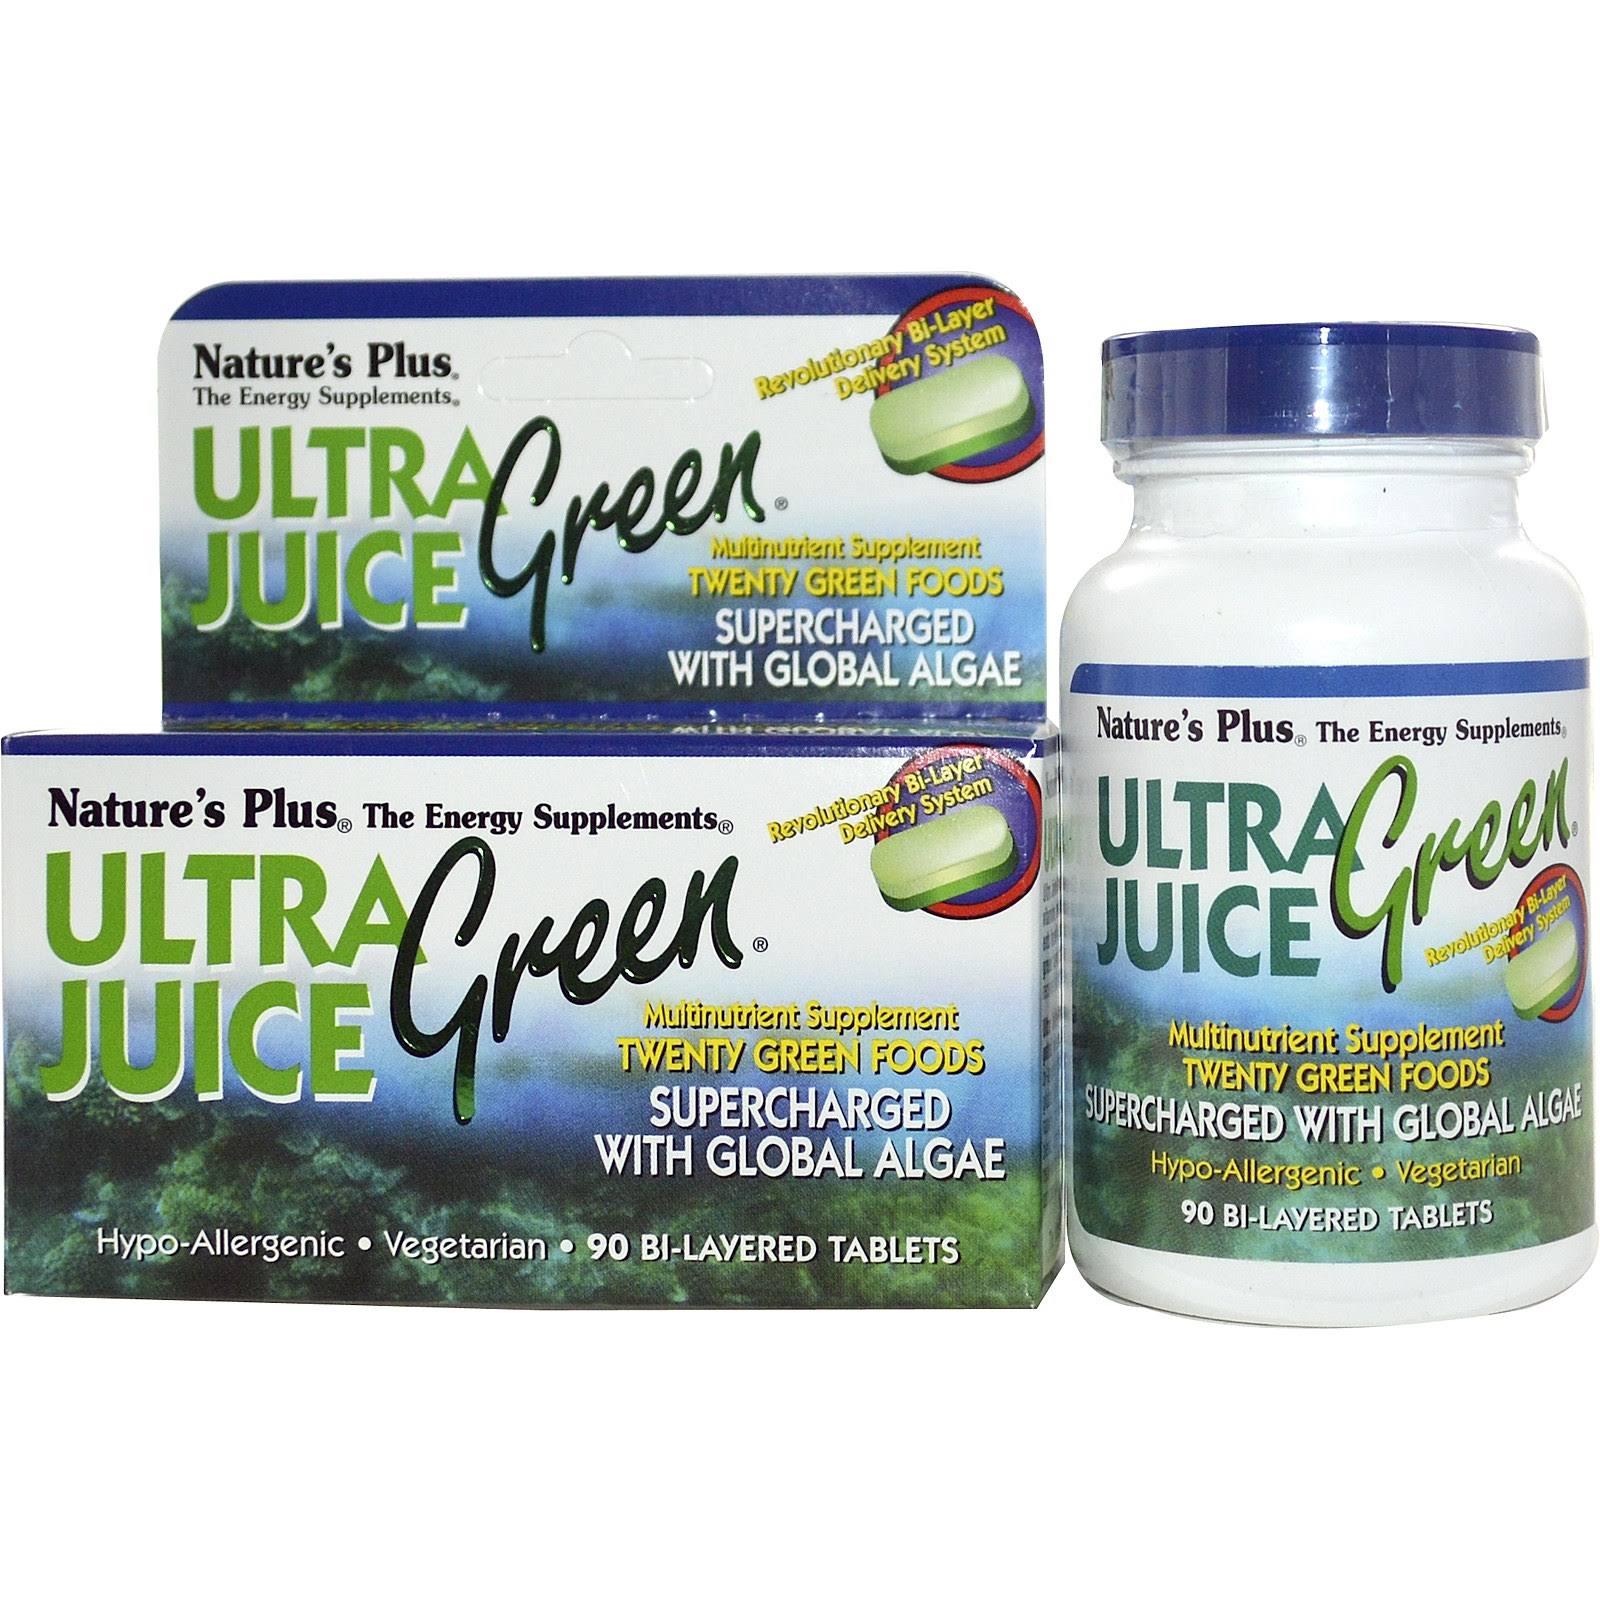 Natures Plus Ultra Juice Green Supplement - 90 Tablets